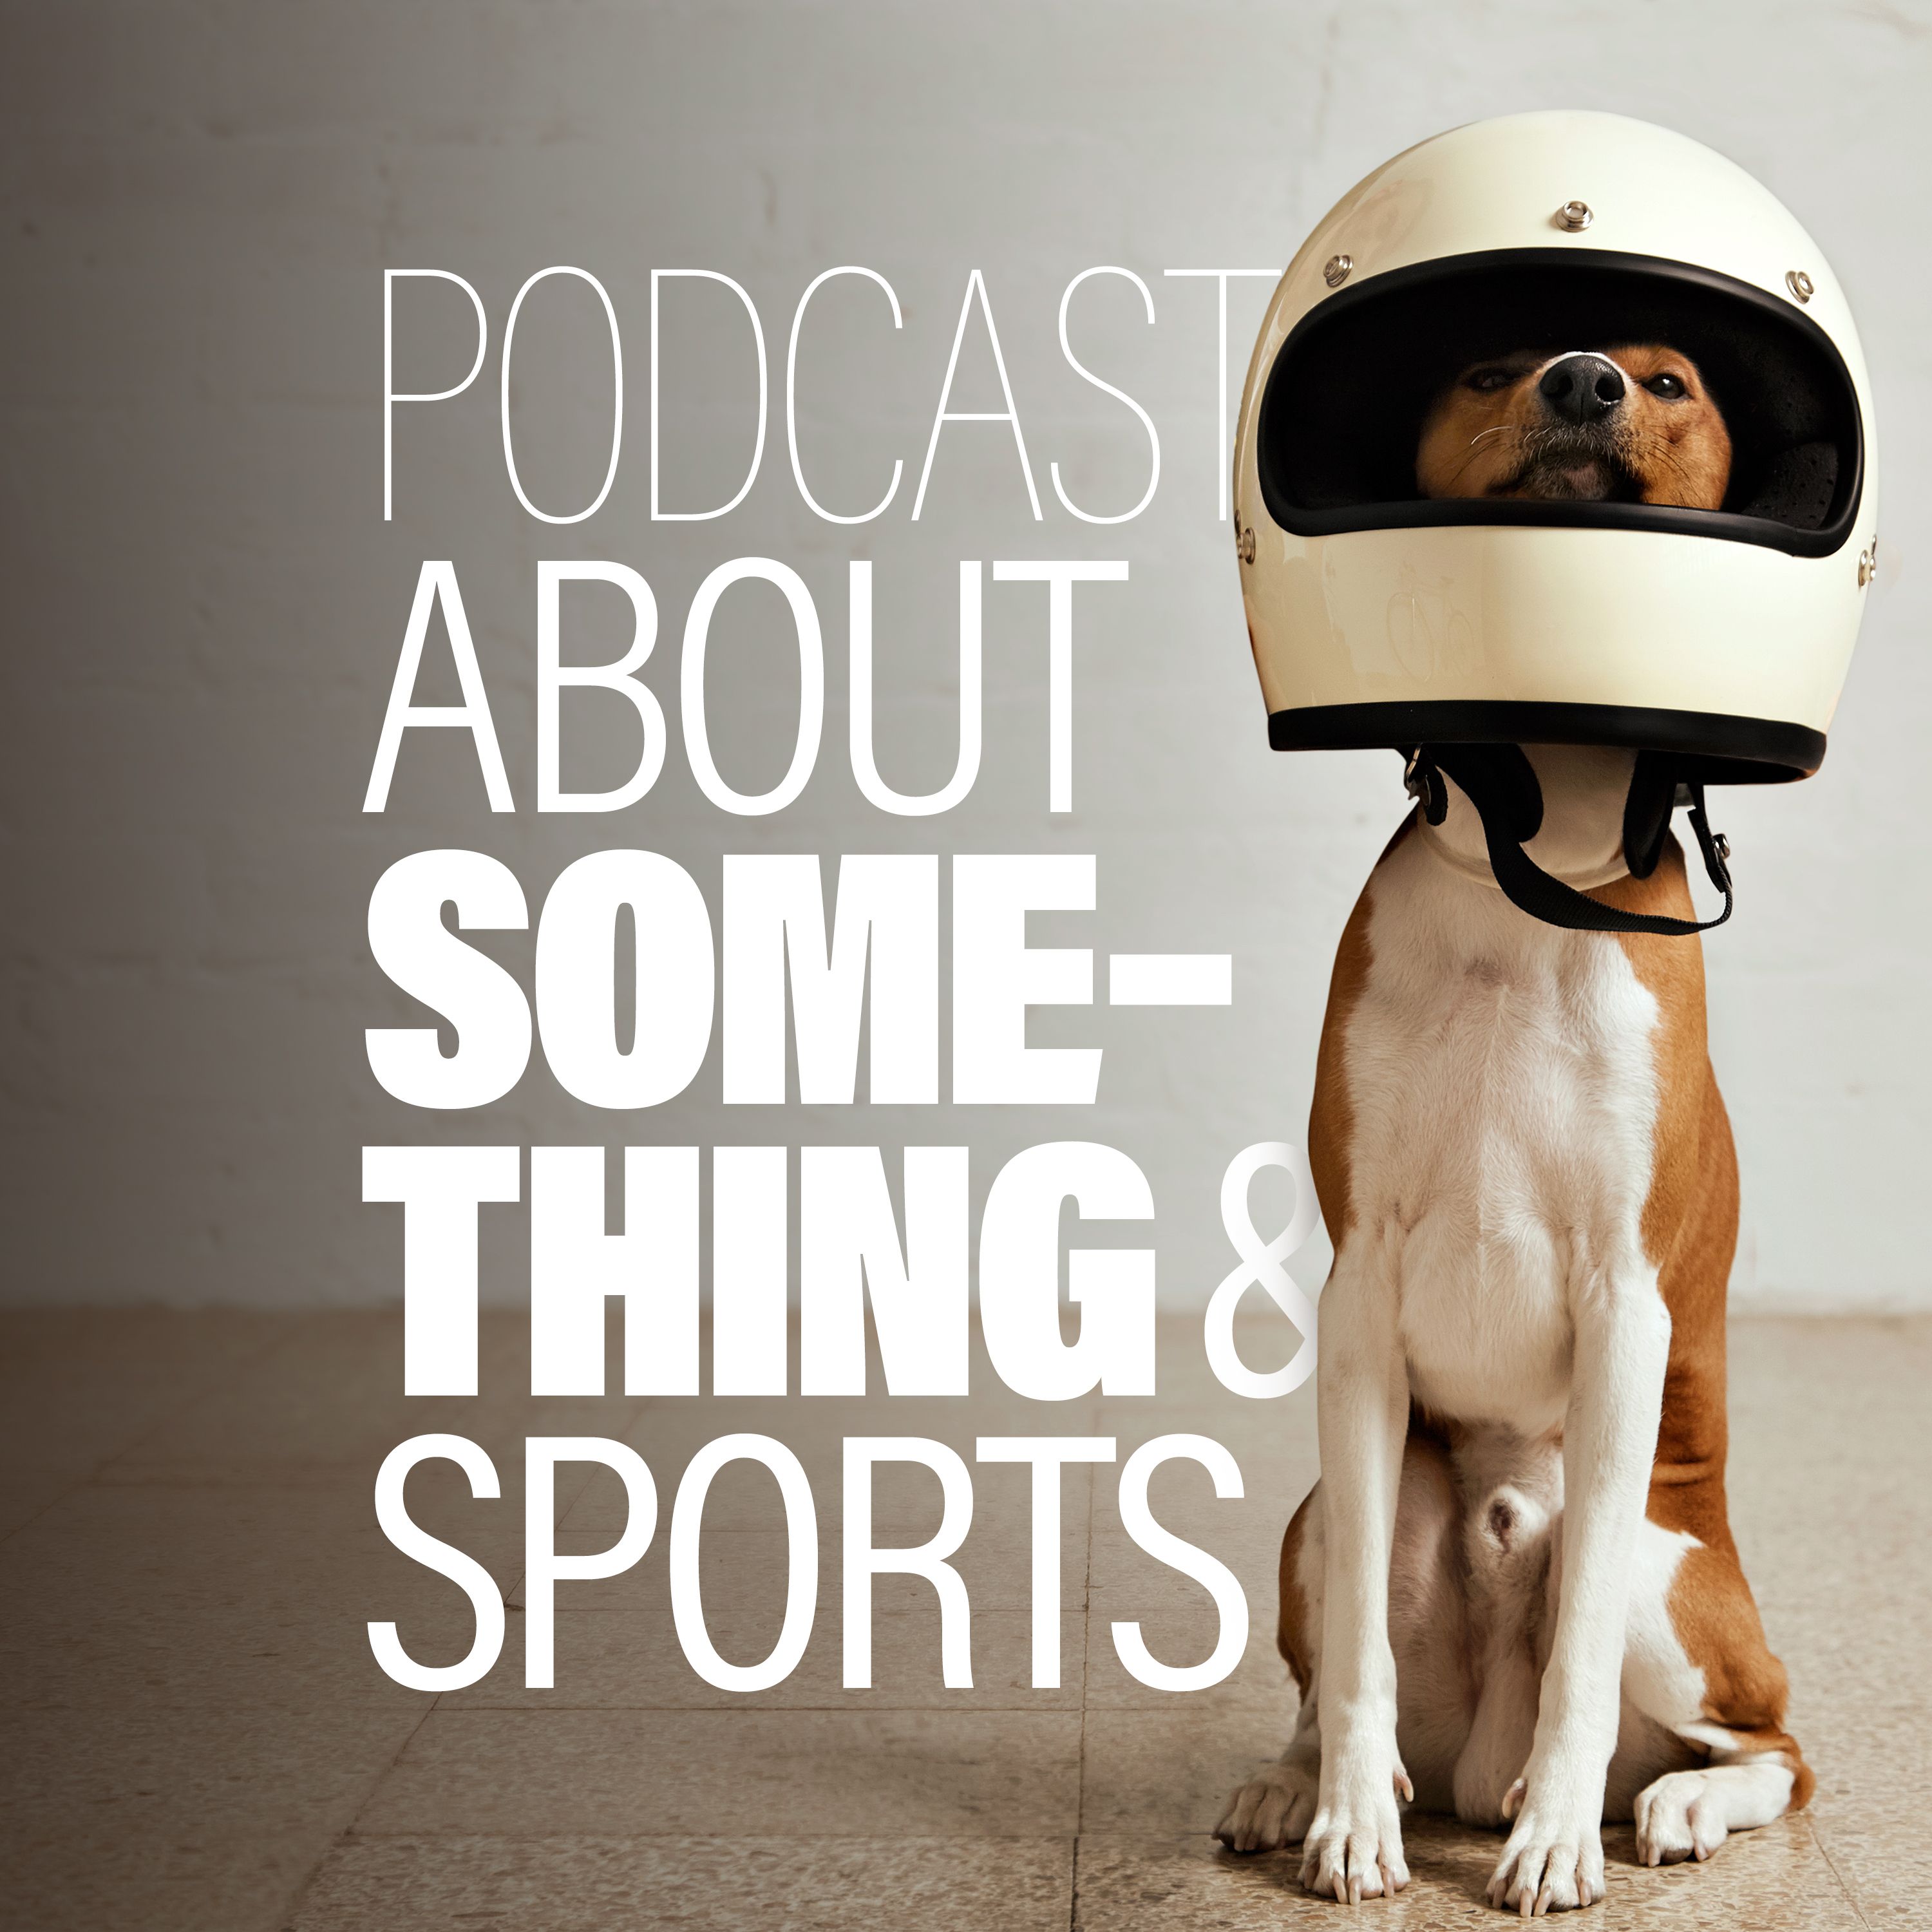 Podcast About Something and Sports